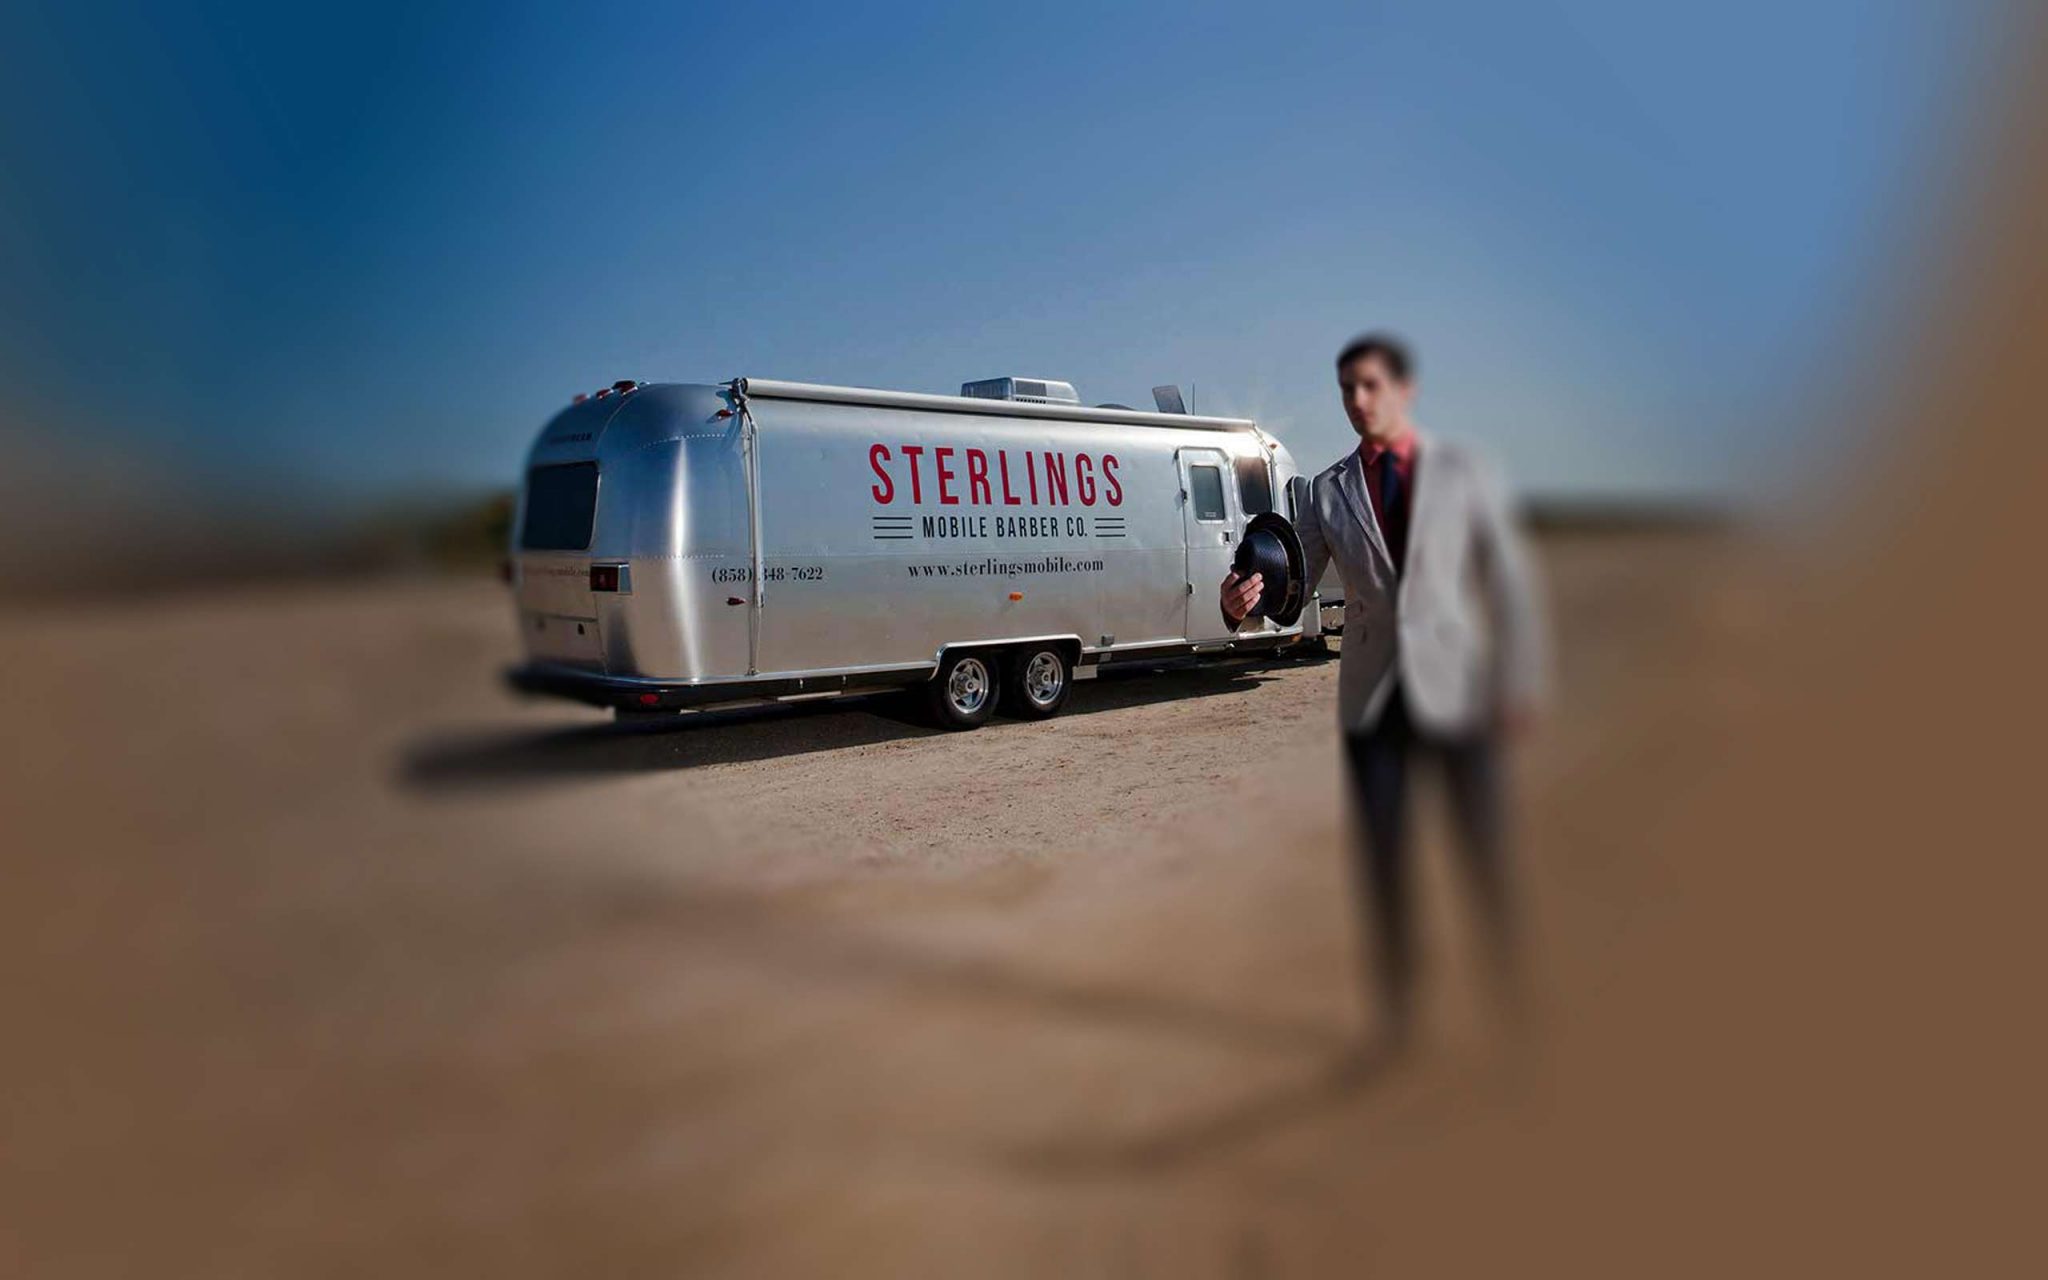 Sterling Mobile Barber Shop Airstream by Timeless Travel Trailers